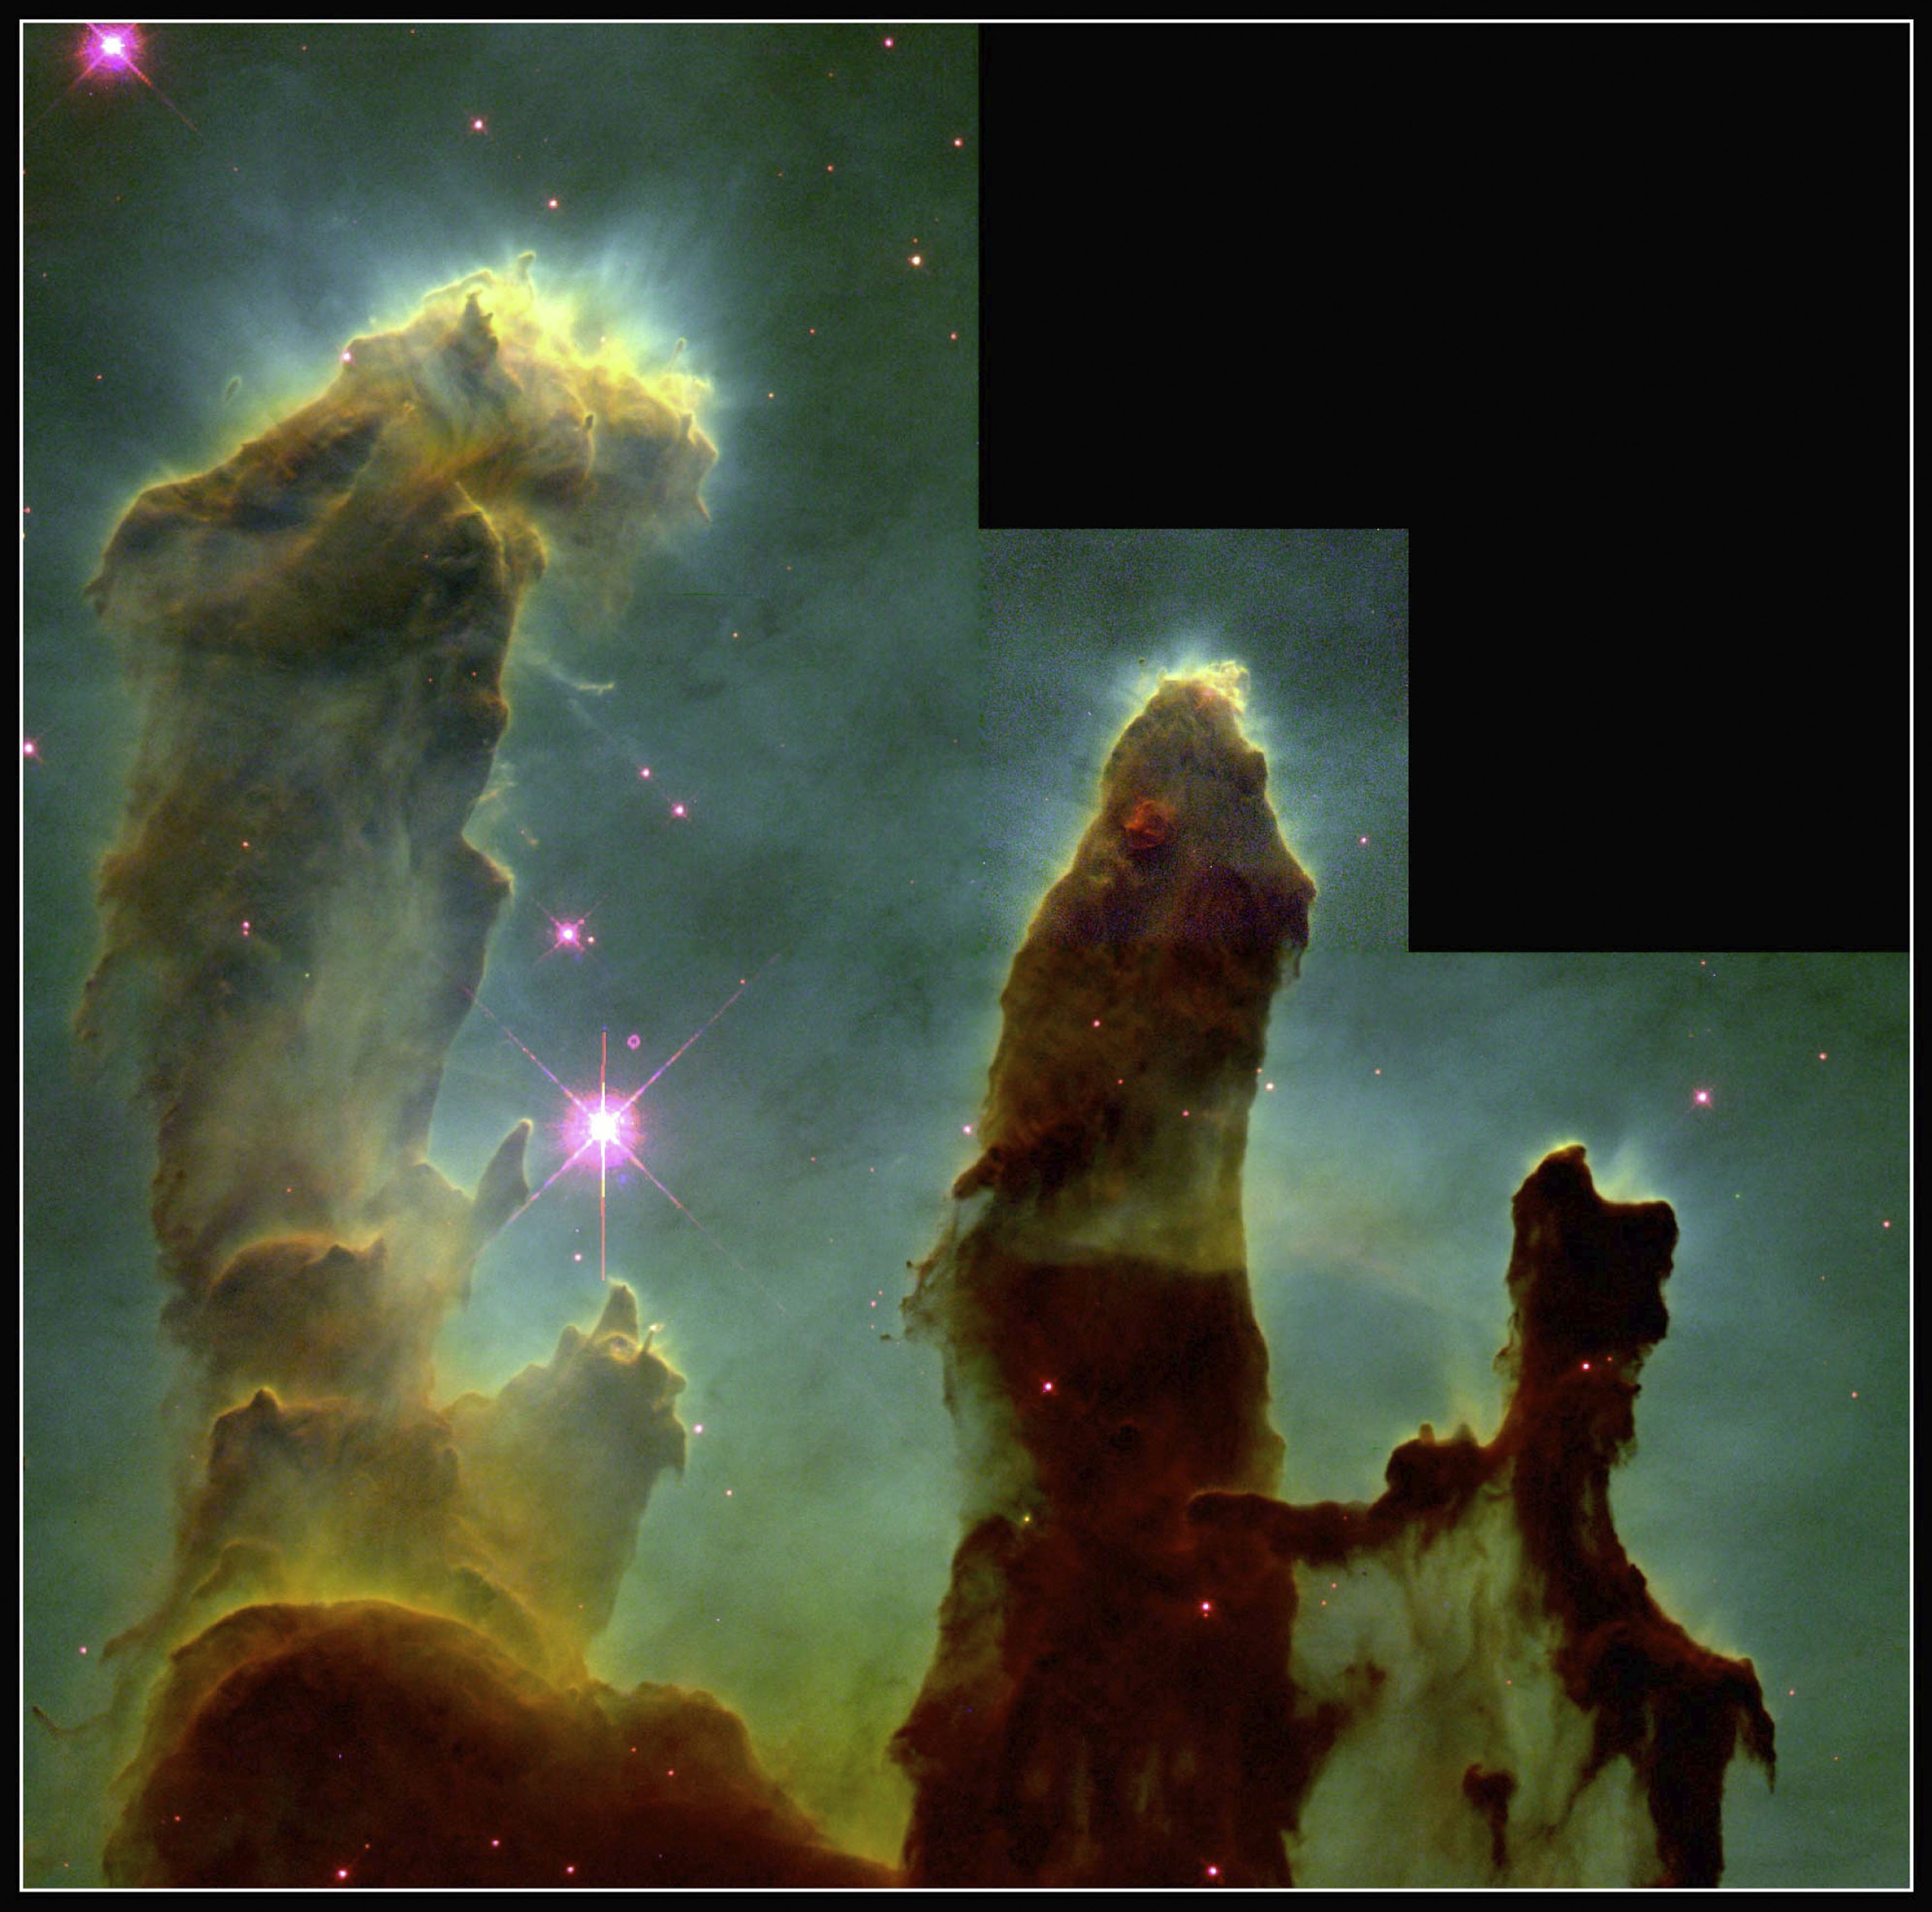 These eerie, dark pillar-like structures are columns of cool interstellar hydrogen gas and dust that are also incubators for new stars. The pillars protrude from the interior wall of a dark molecular cloud like stalagmites from the floor of a cavern. They are part of the Eagle Nebula and were captured by the Hubble telescope in 1995 (Science &amp; Society Picture Library—SSPL via Getty Images)